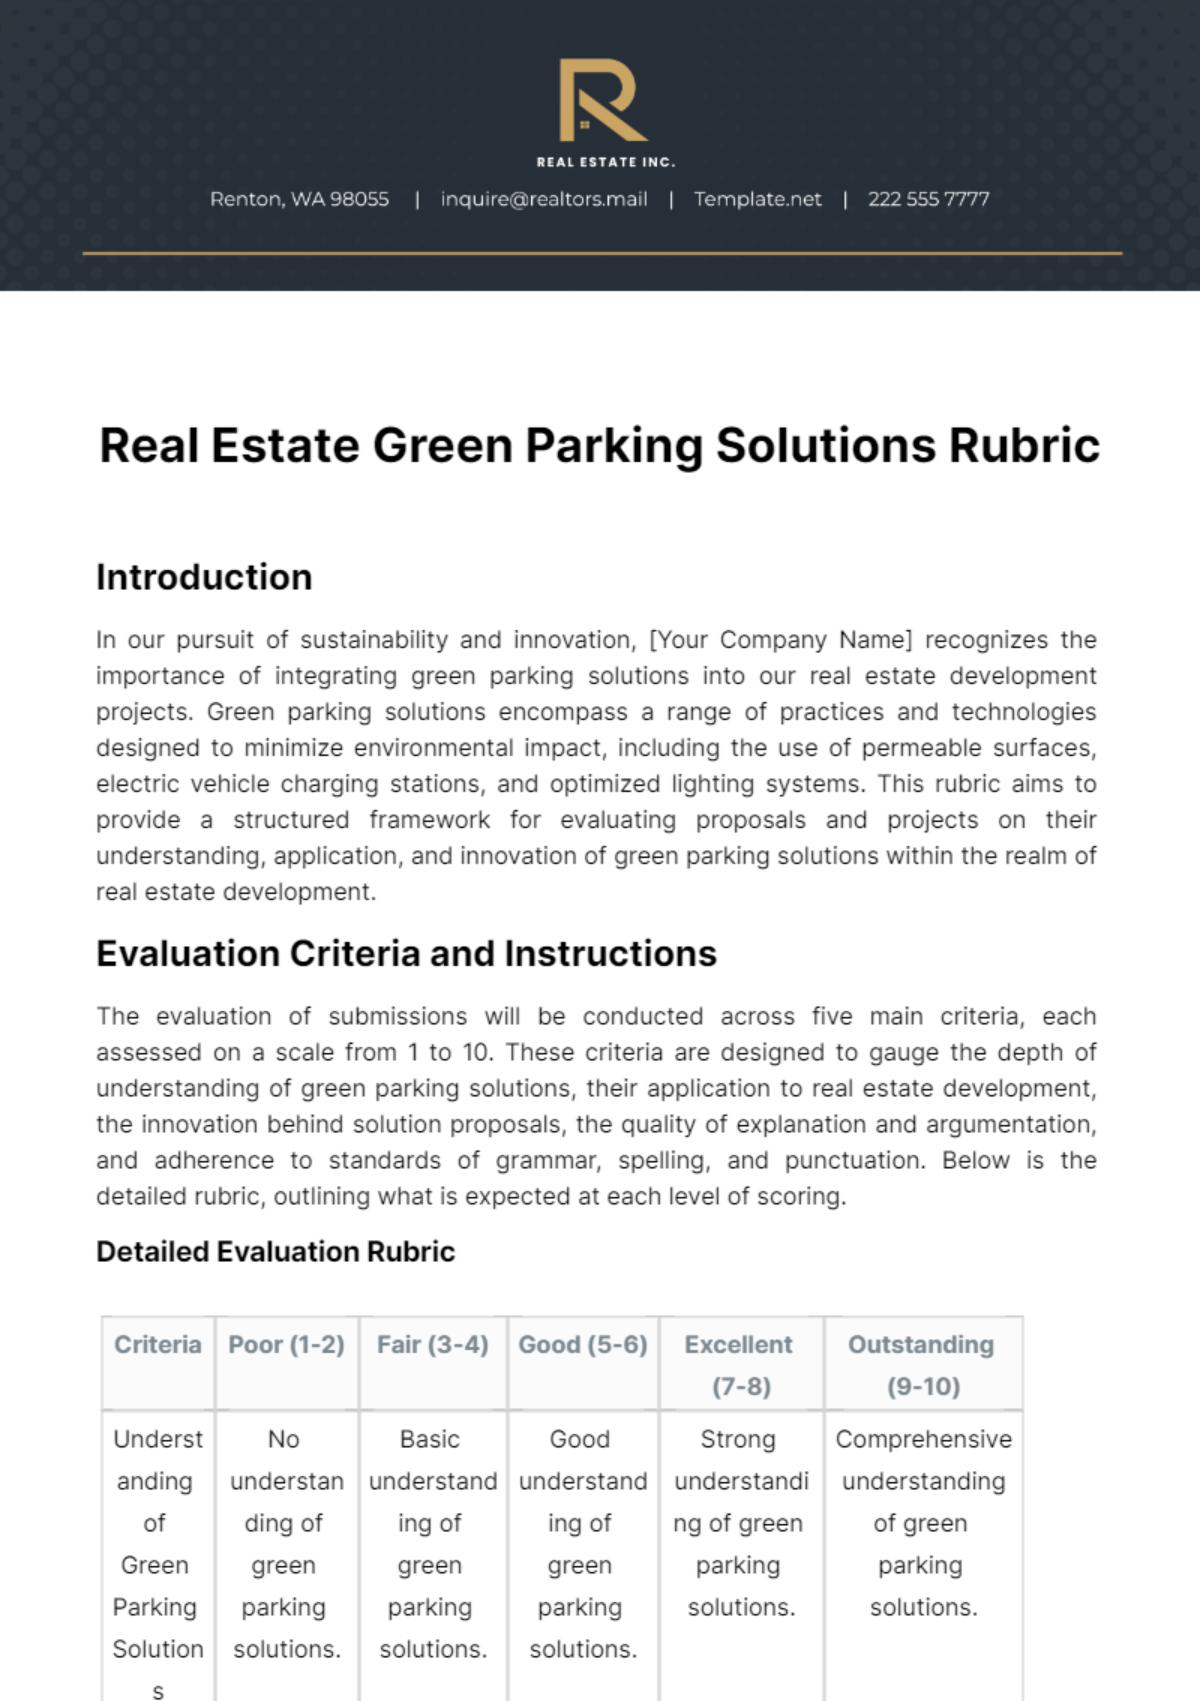 Real Estate Green Parking Solutions Rubric Template